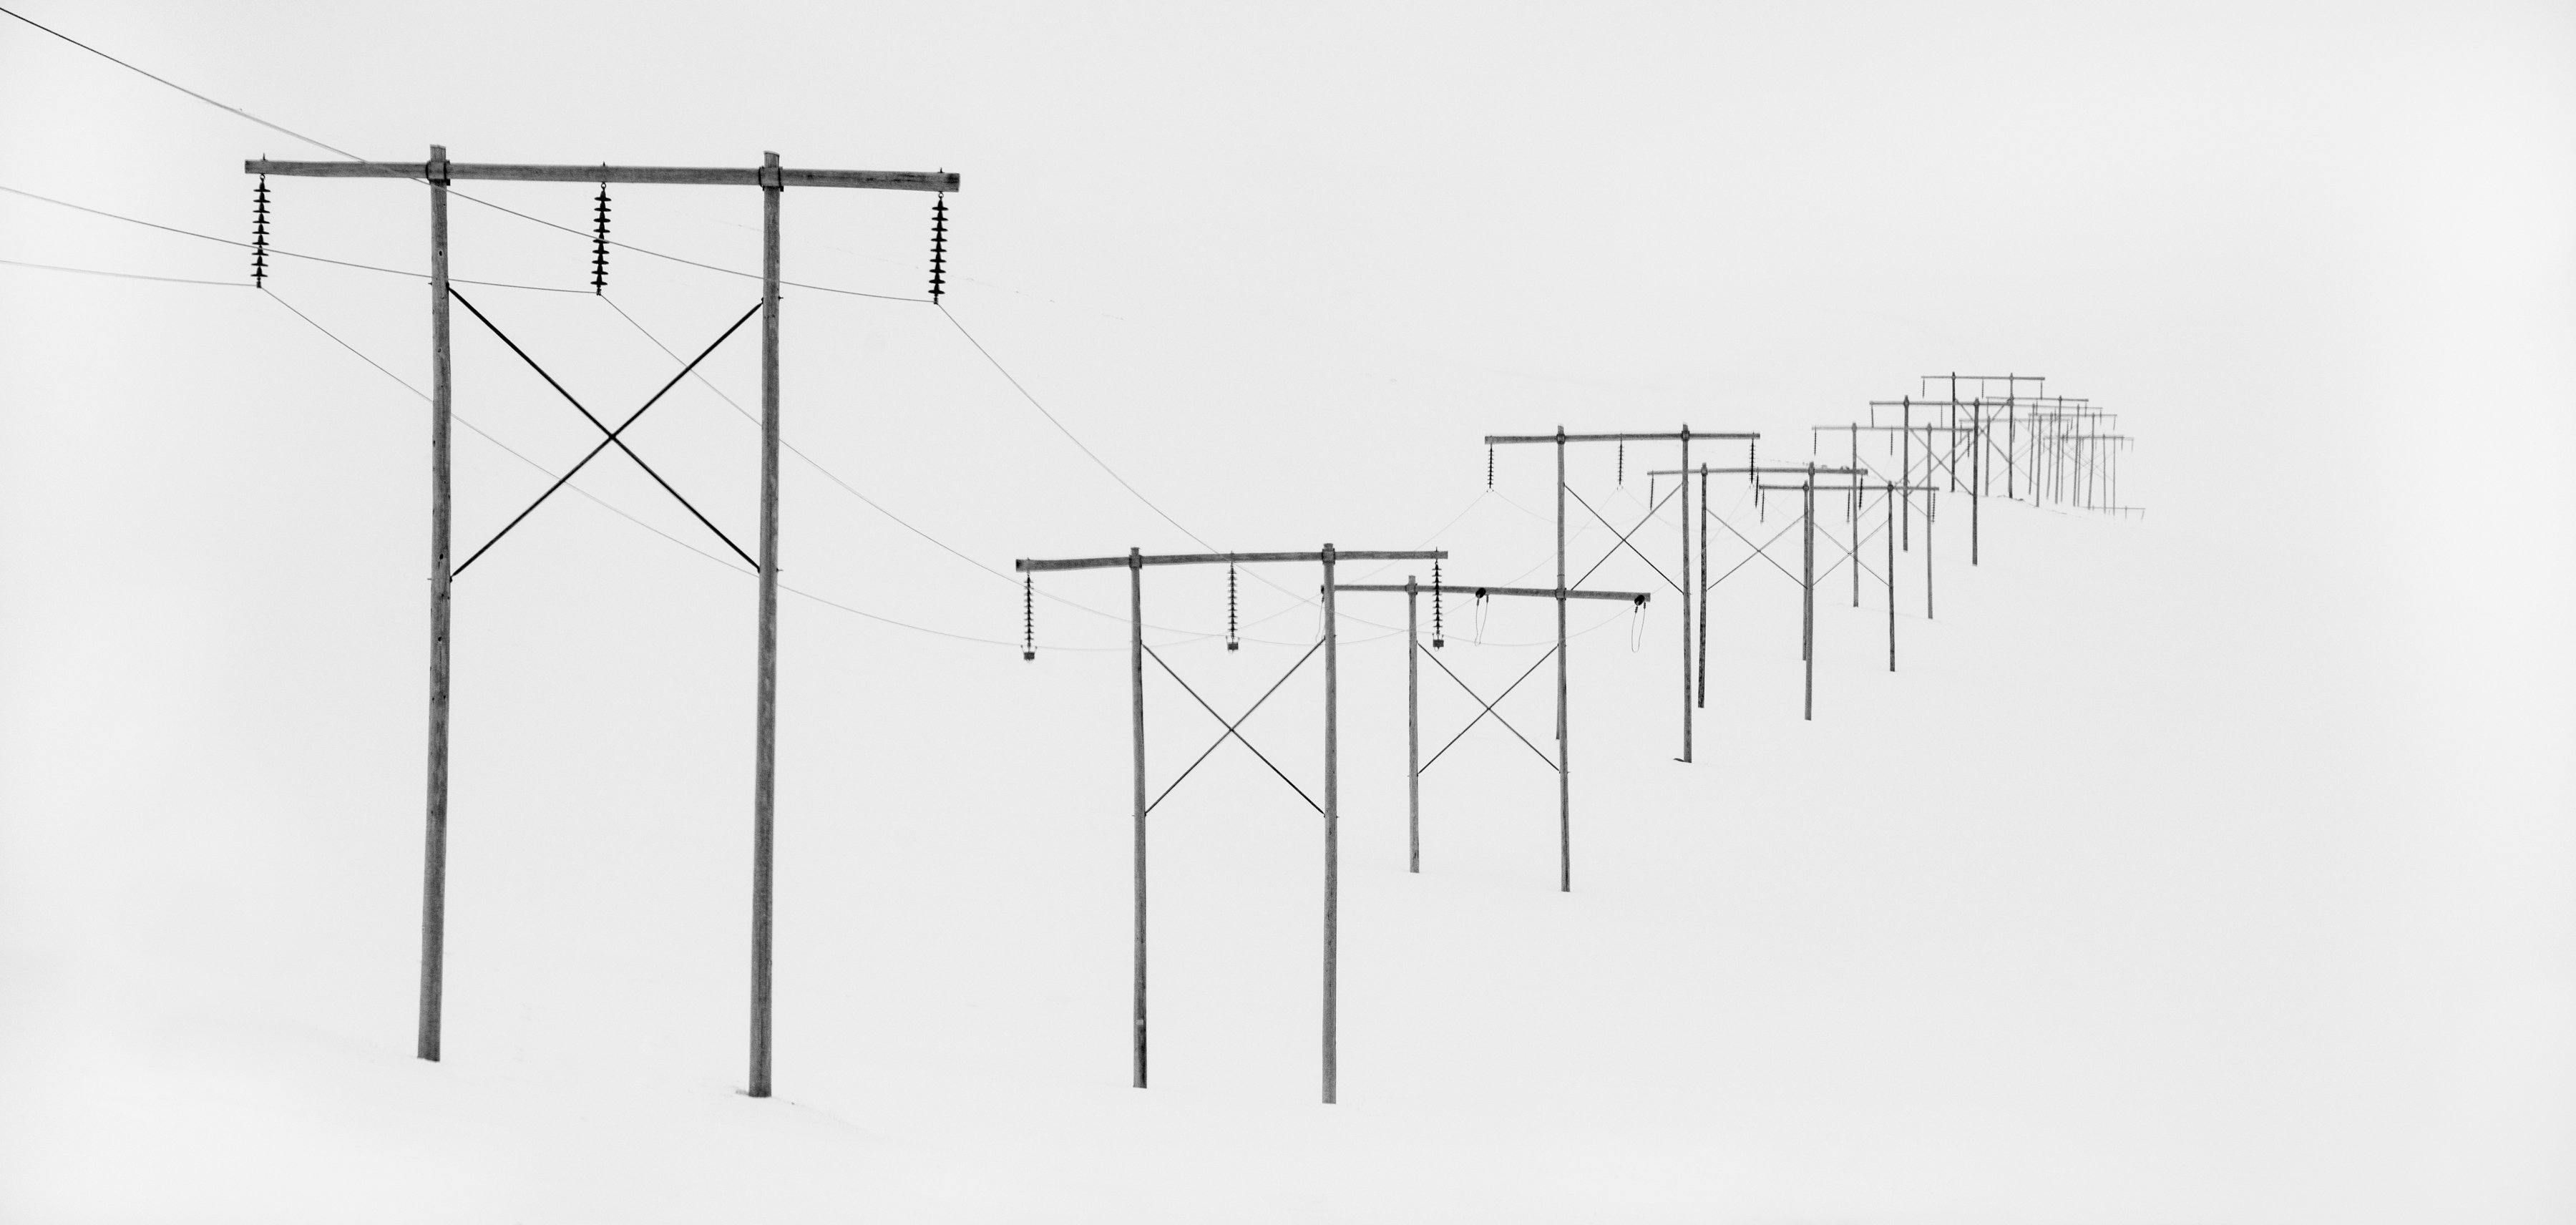 Electricity poles with wires on a snow-covered land, Power Poles in snow, Iceland